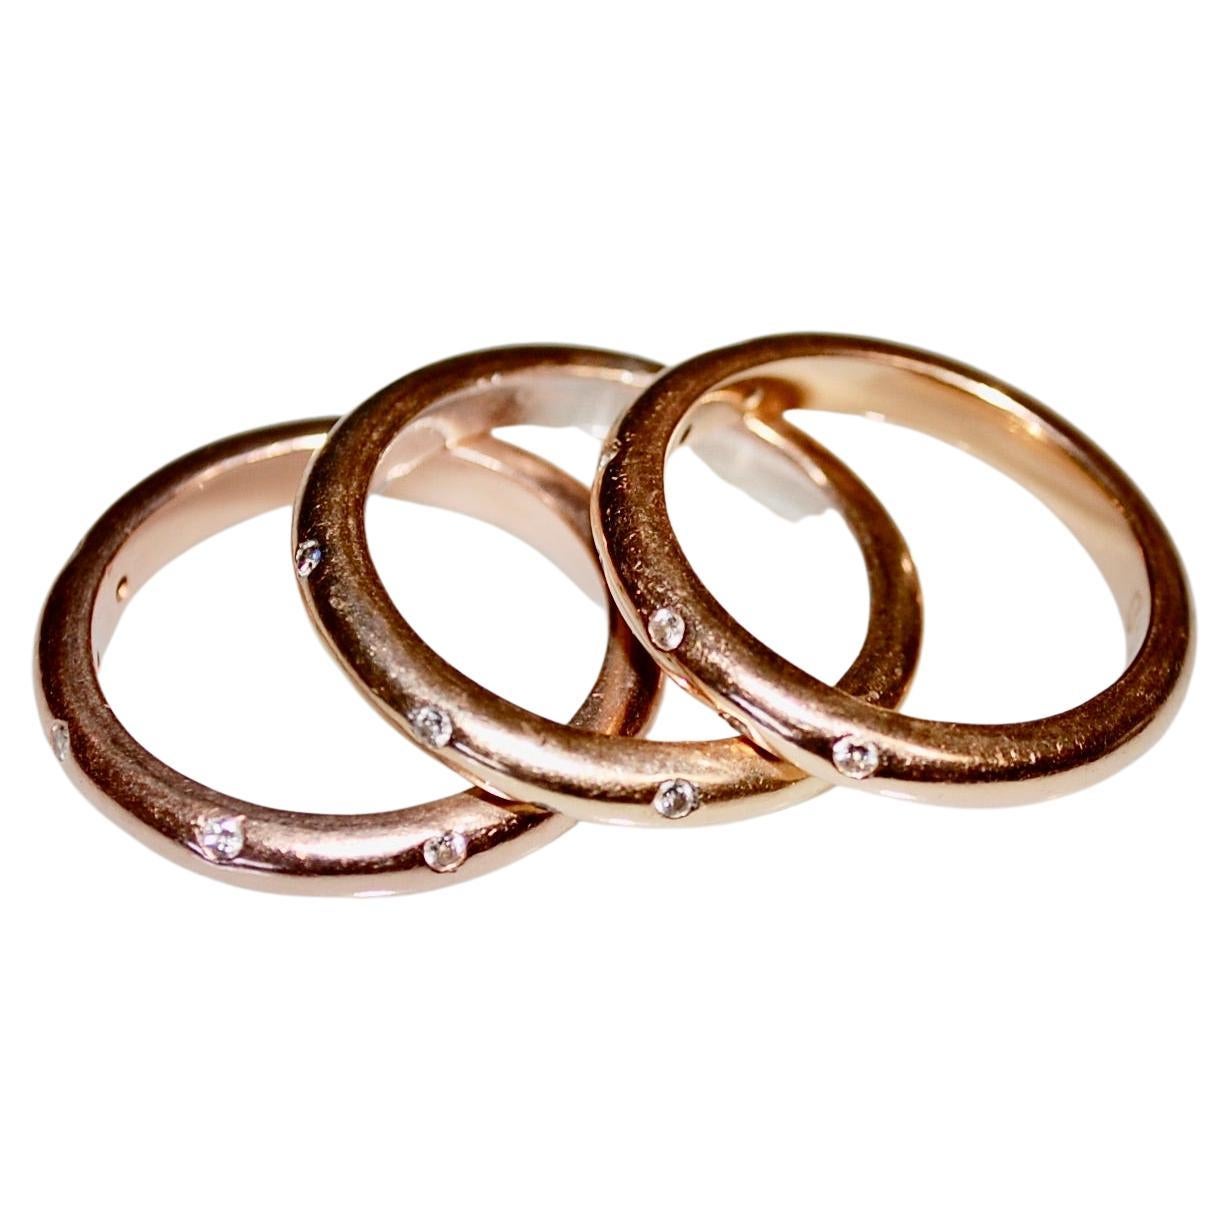 Tiffany style 18k gold three rings set with 6 small round brilliant cut diamonds.
Two rings are in yellow gold and one in rose gold, total weight 15 grams, about 3mm wide, size 7.